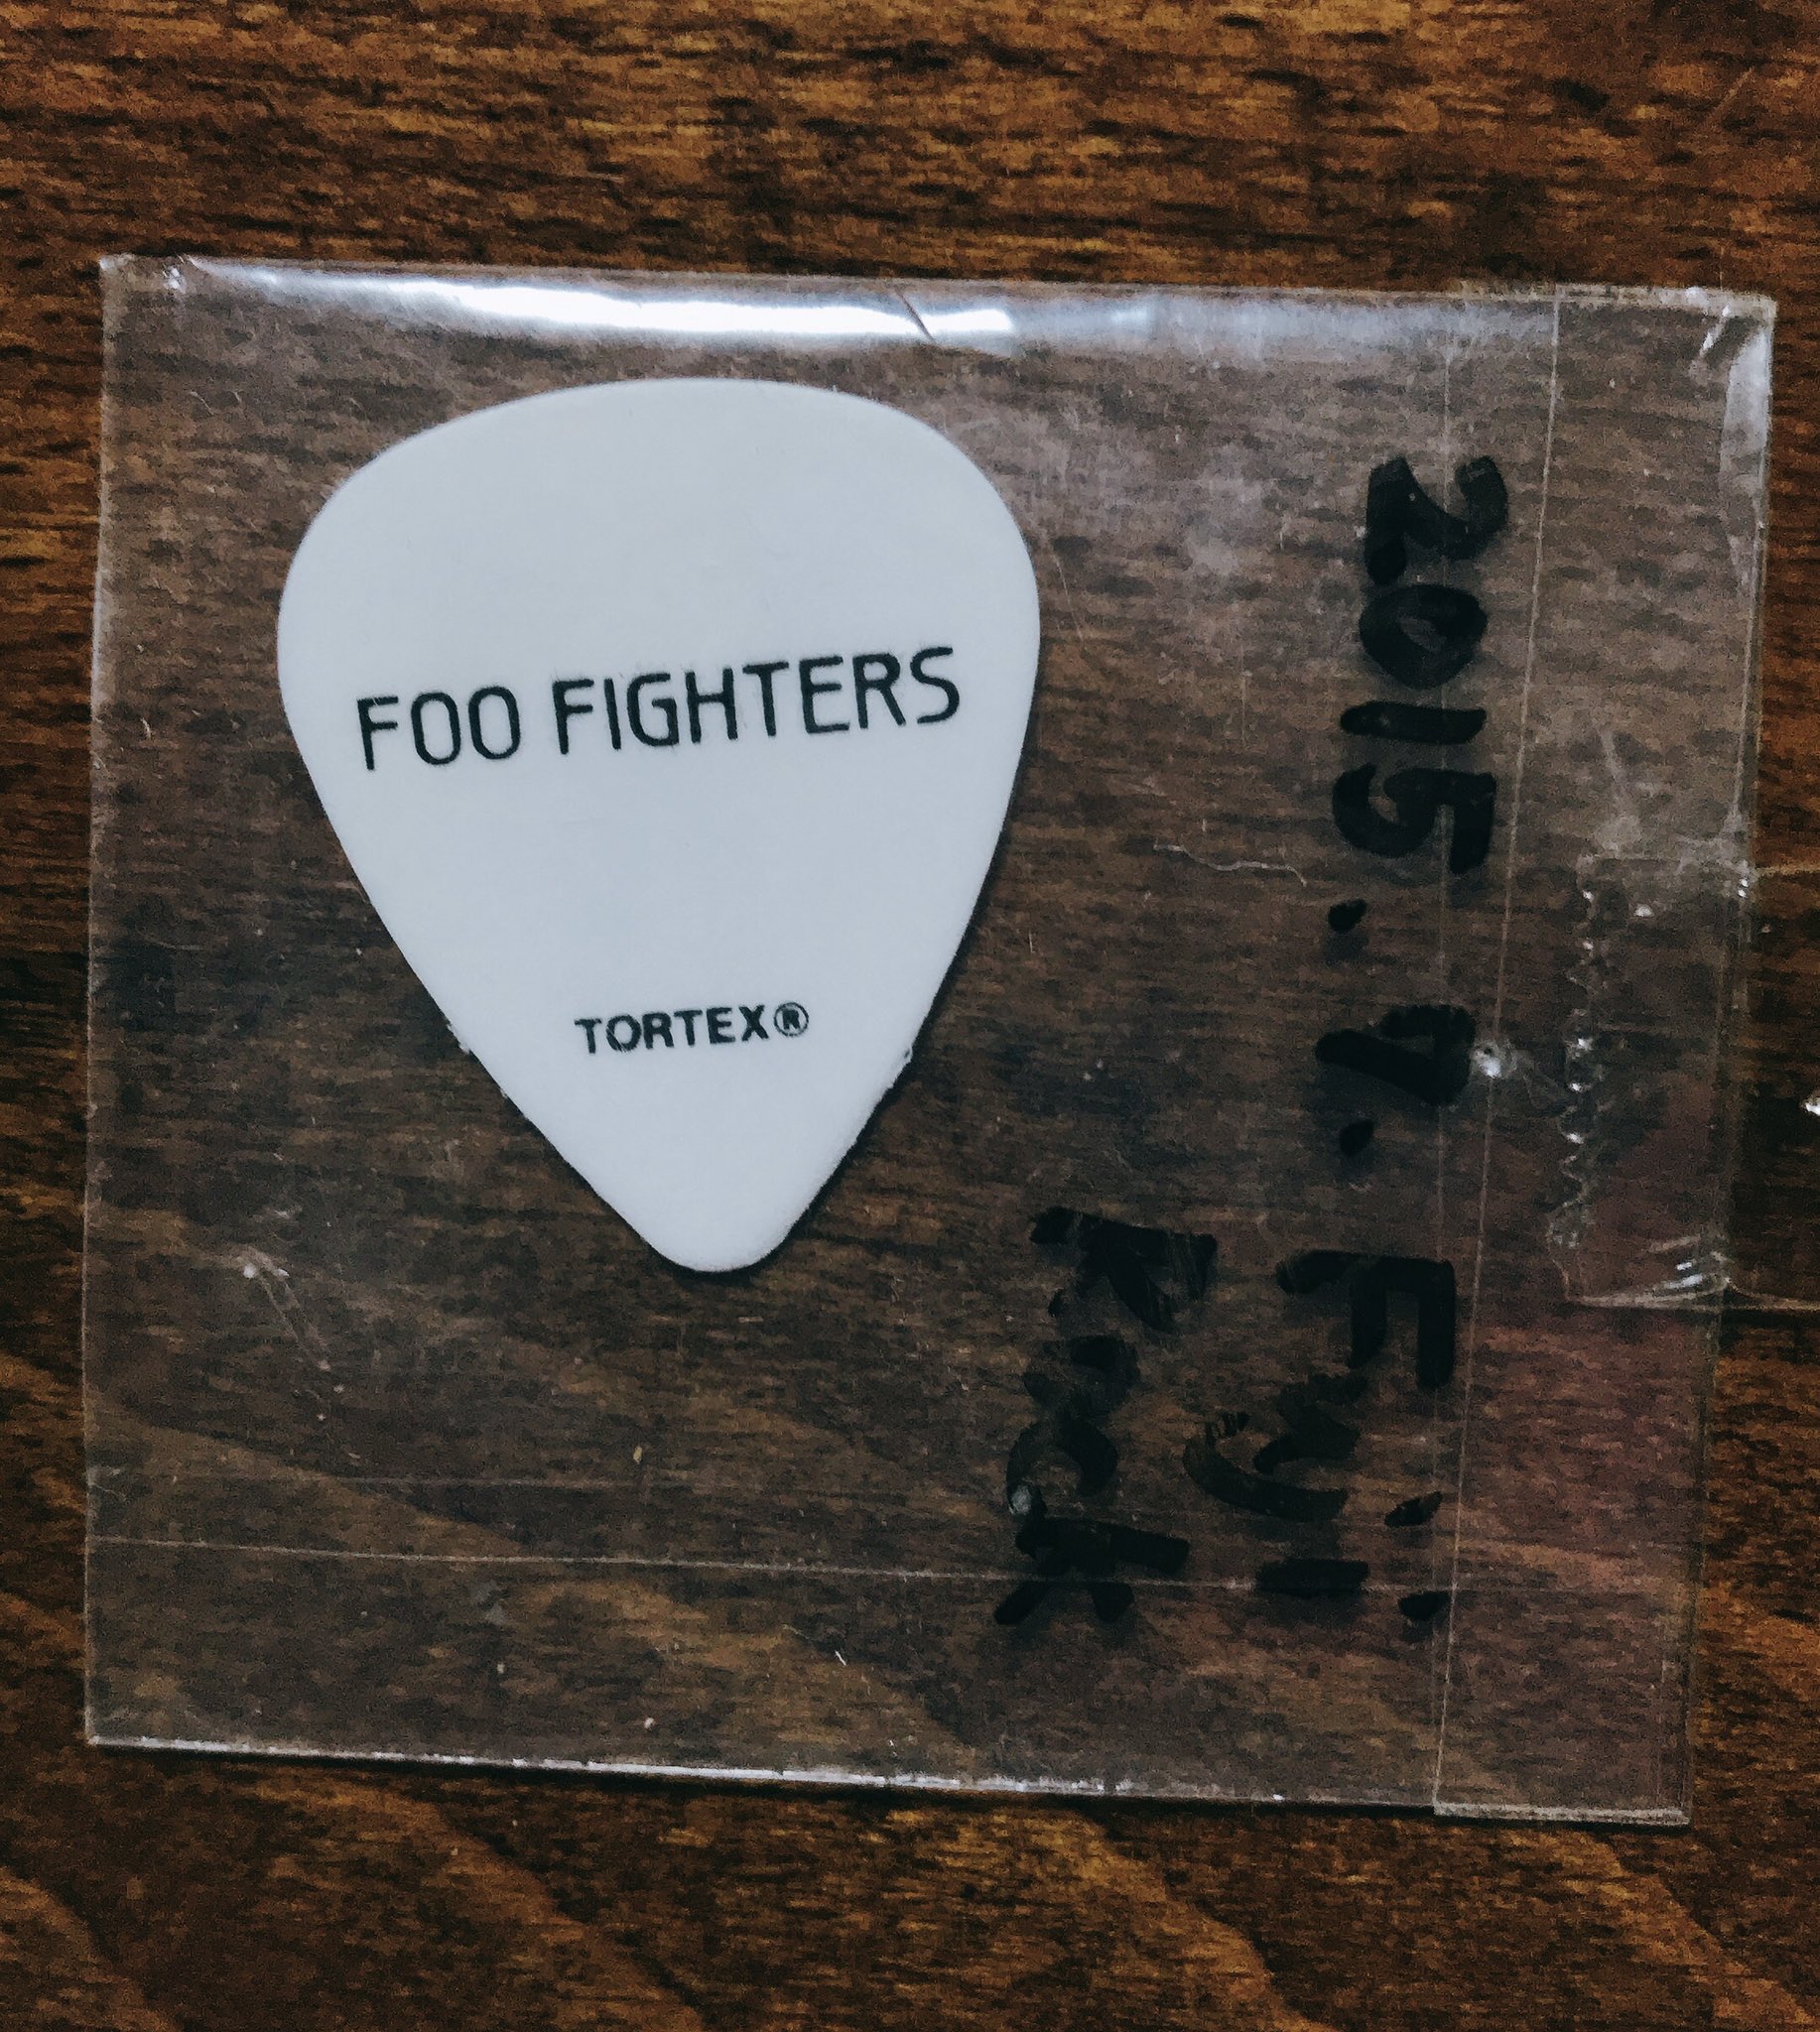 Happy Birthday, Dave Grohl!!
This is my treasure 